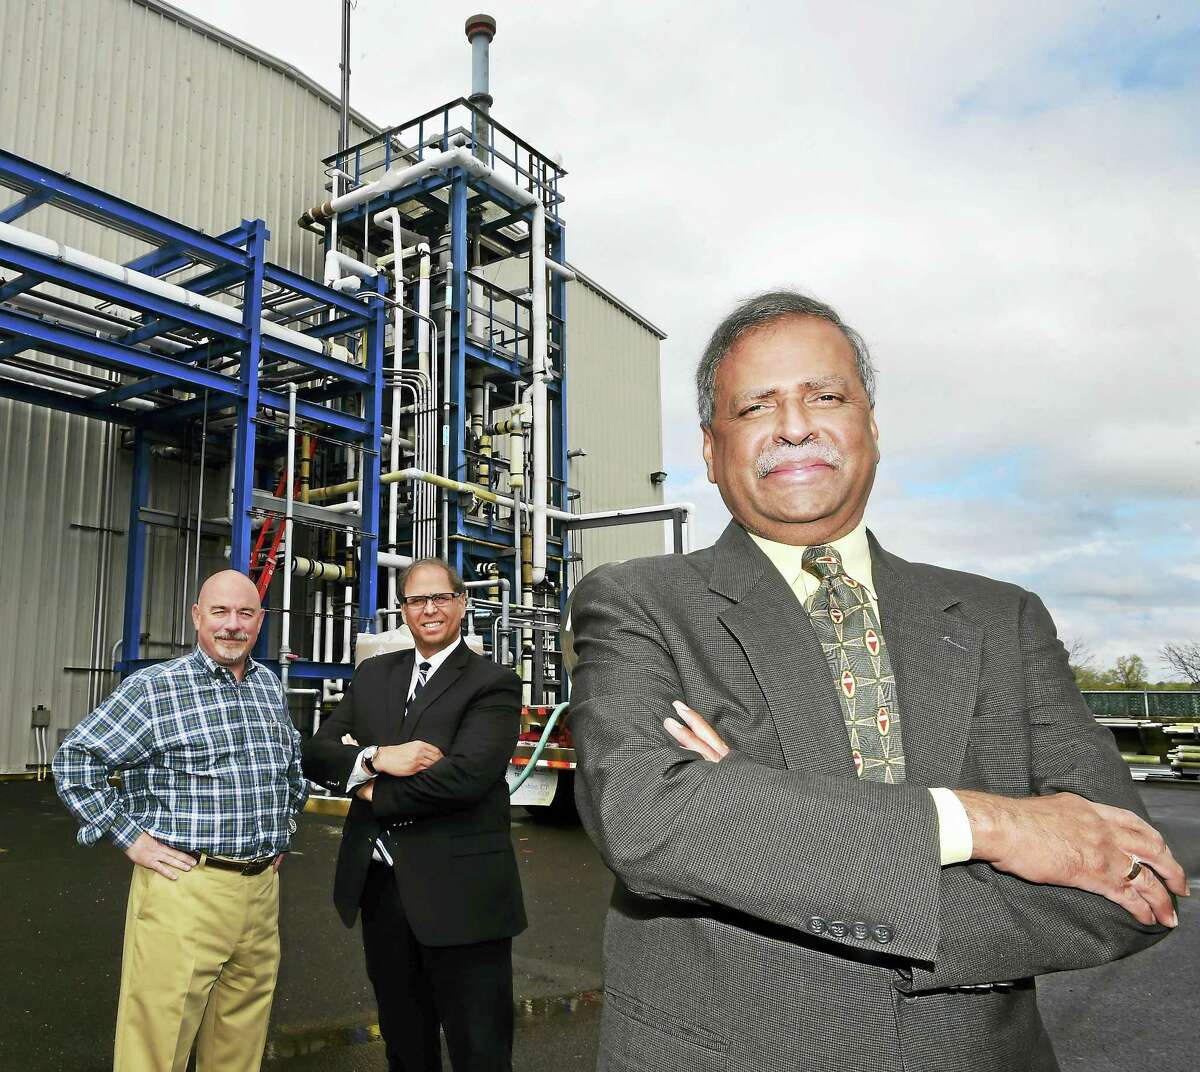 N. C. Murthy, President and CEO of New Haven Chlor-Alkali, doing business as H. Krevit & Company, right, with Bruce H. Wilson Jr. senior vice-president of operations, left, and Thomas Ross, senior vice-president of sales, center, stand by a hydrochloric acid synthesis unit at the 97-year-old New Haven based company, Friday, May 6, 2016. New Haven Chlor-Alkali, as H. Krevit & Company, manufactures sodium hypochlorite (bleach), caustic soda and hydrochloric acid from salt to be used a water treatment chemicals.